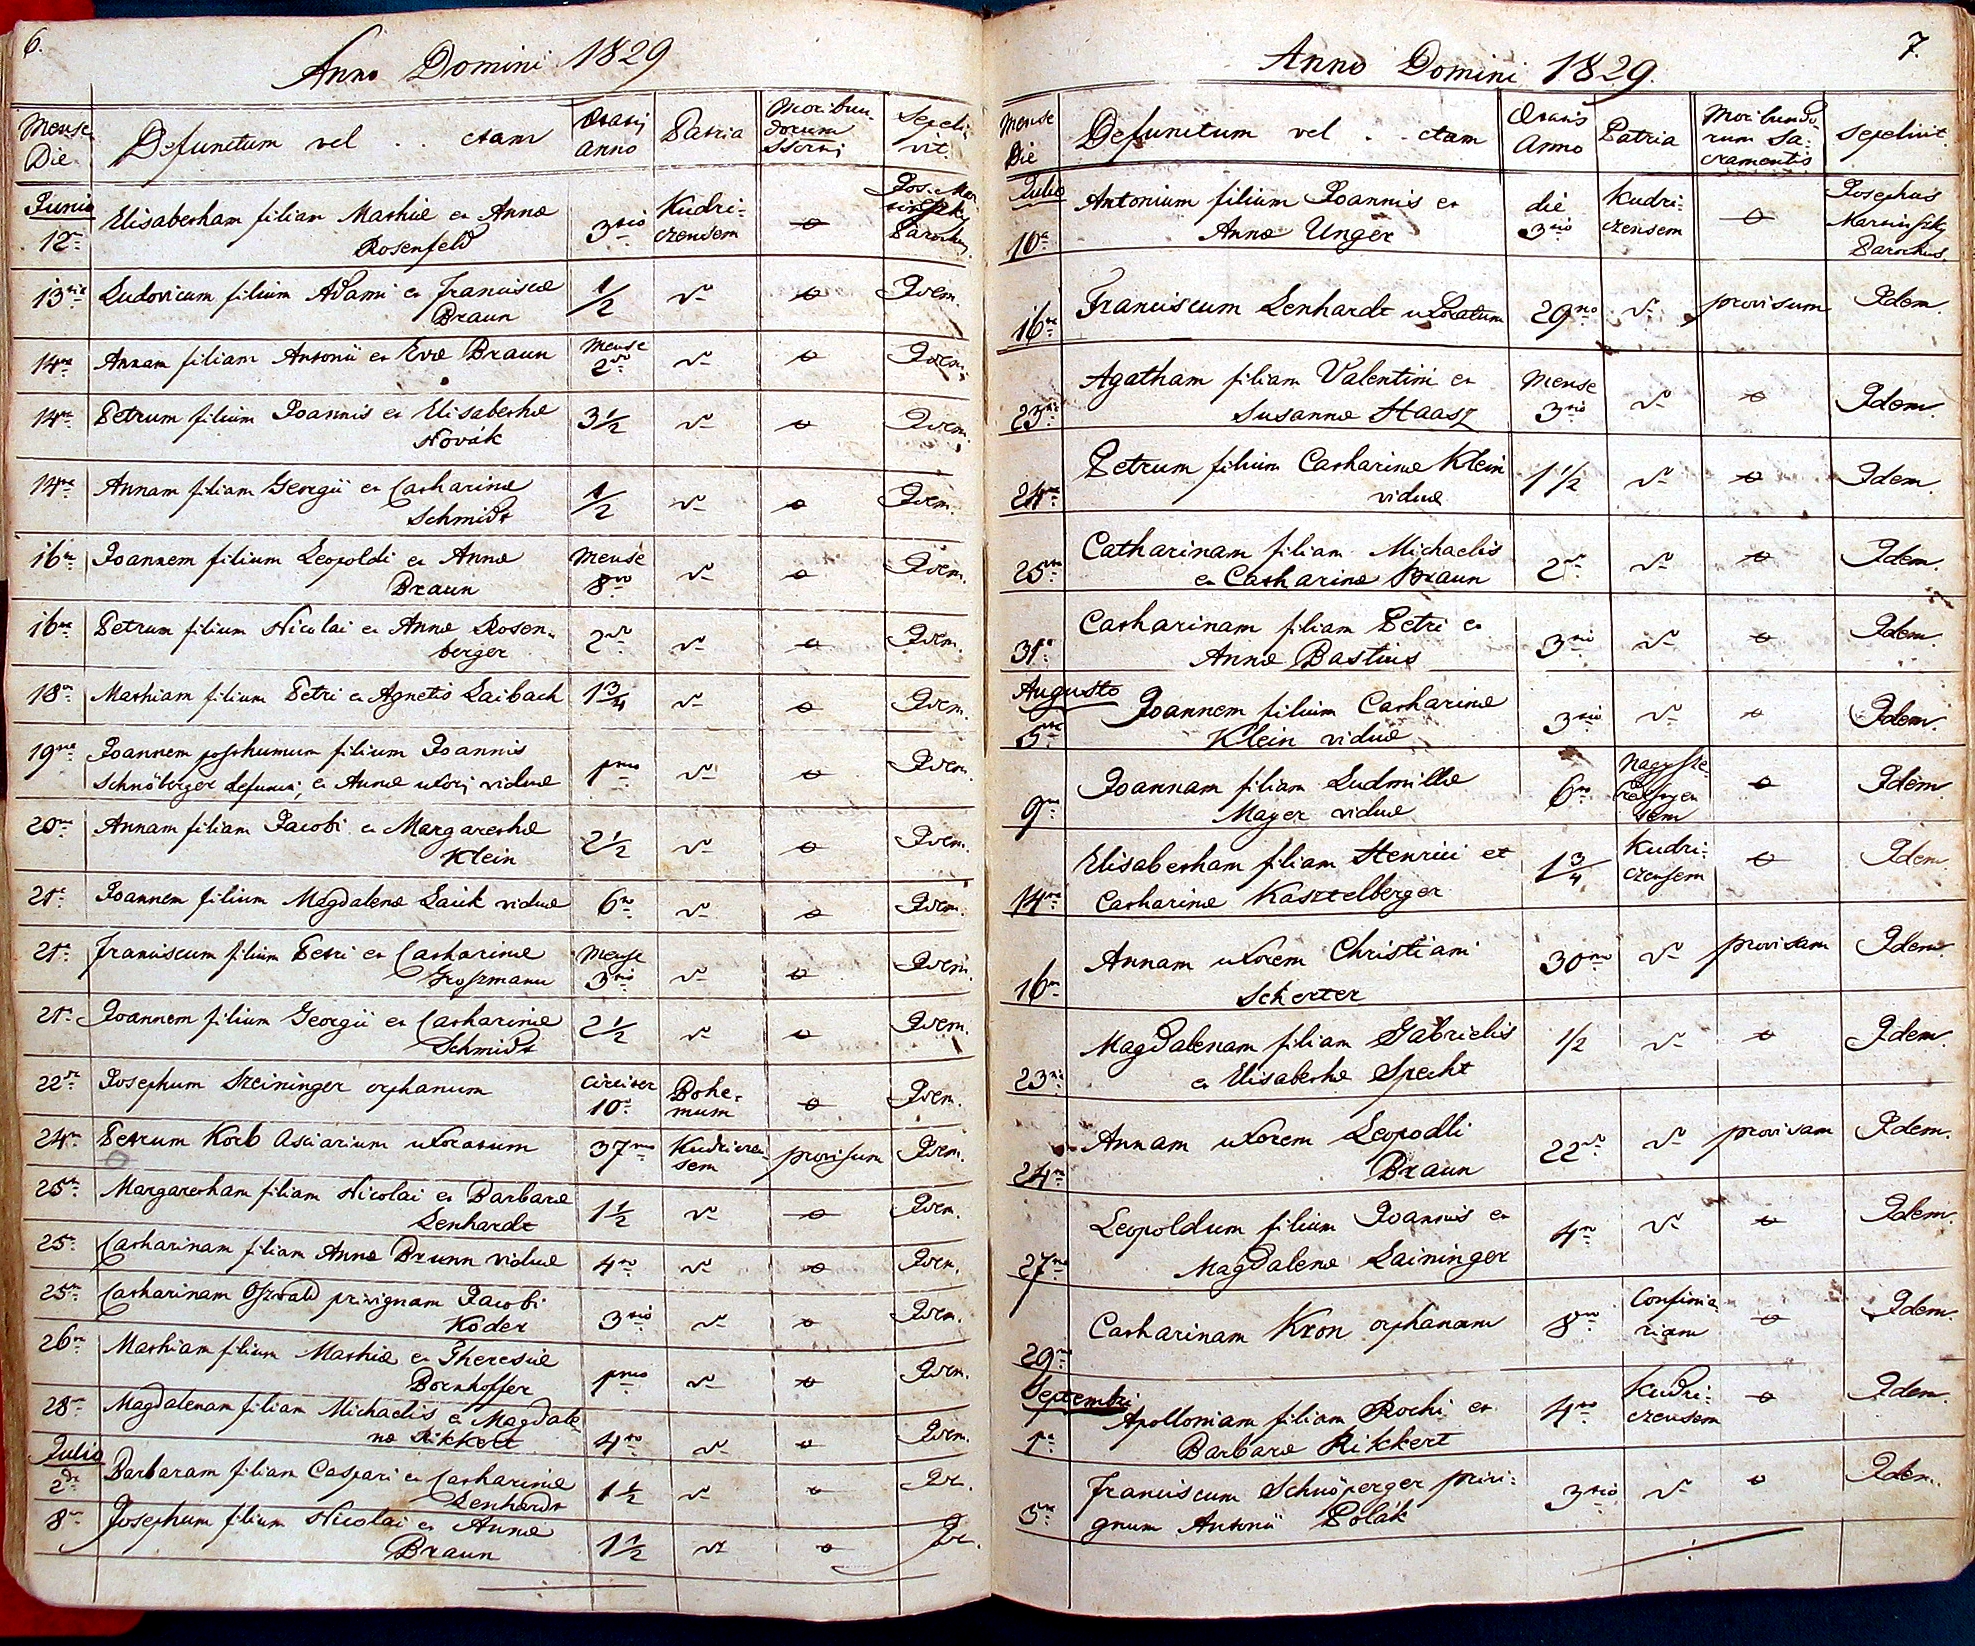 images/church_records/DEATHS/1775-1828D/006 i 007